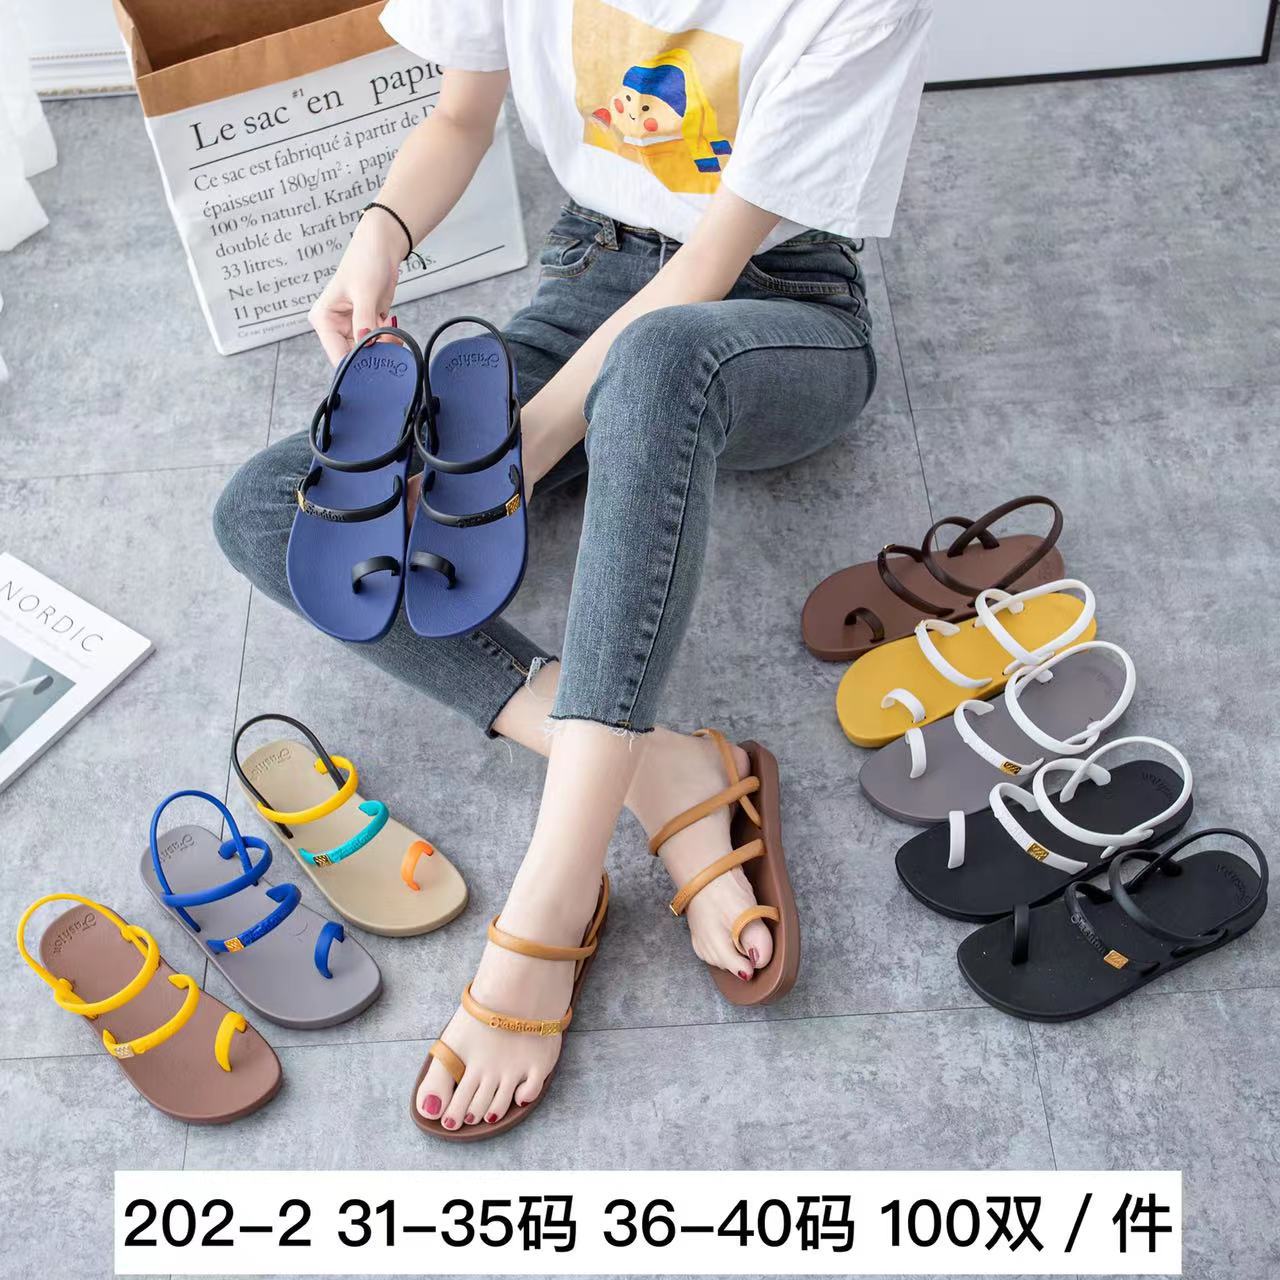 Foreign Trade Shoes Flip-Flops Summer New Leisure Home Daily Plastic Ladies' Sandals Wholesale